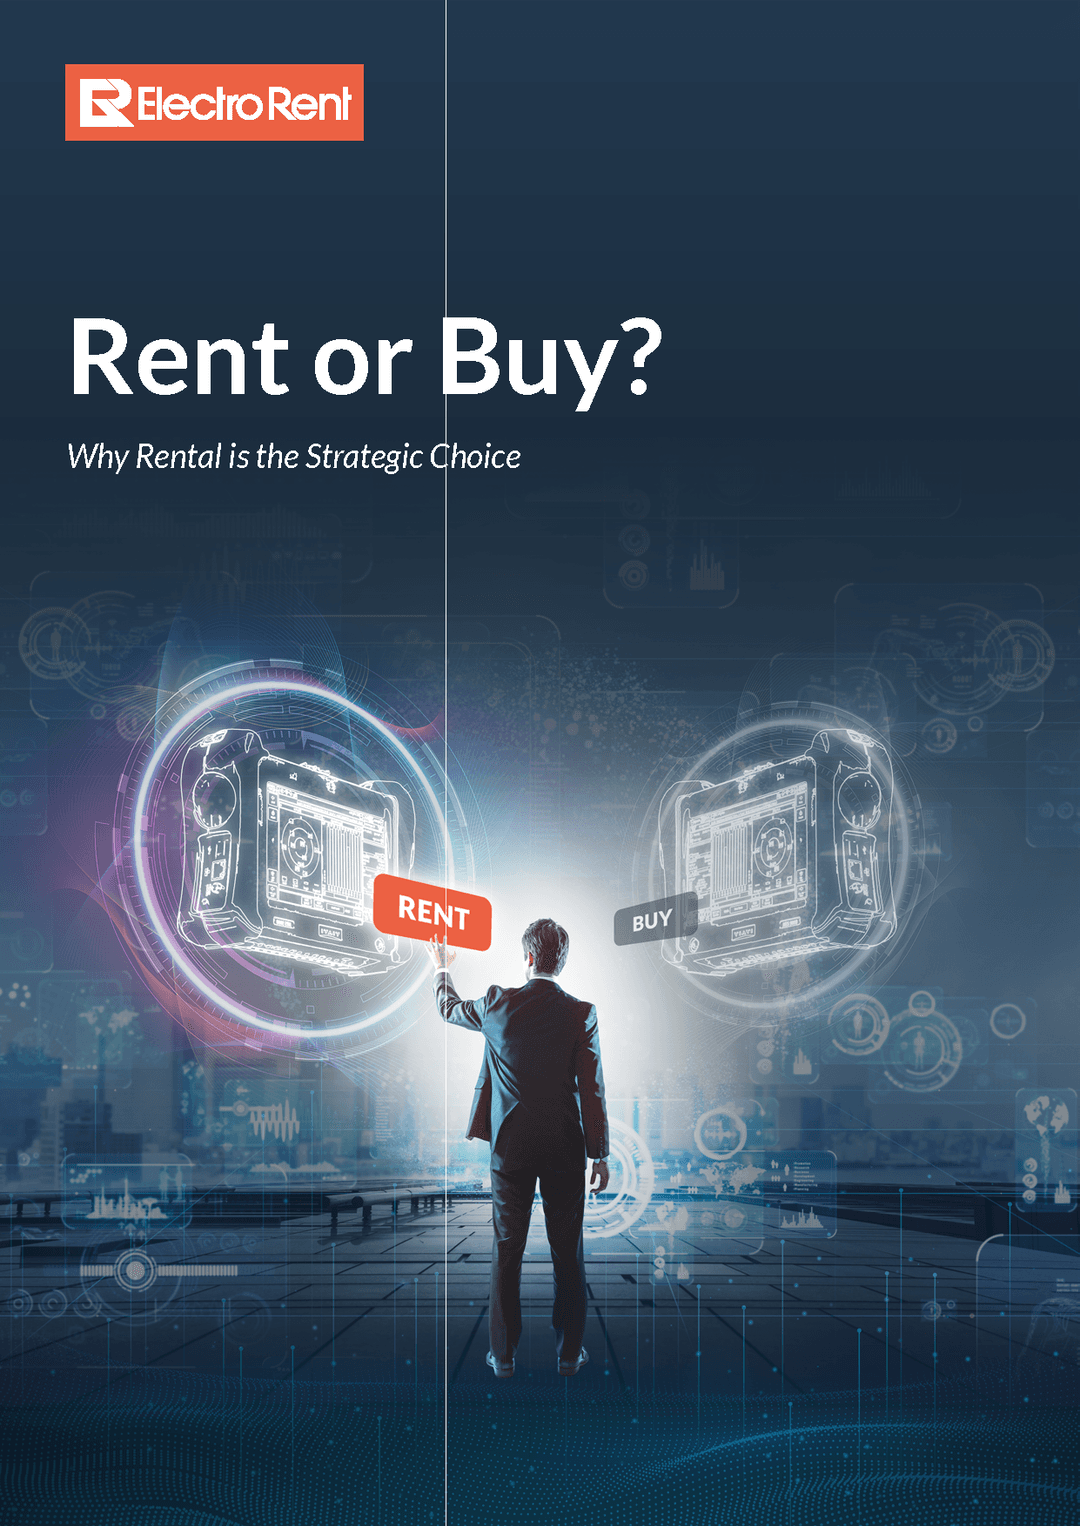 Rent or Buy? Why Equipment Rental is the Strategic Choice, image